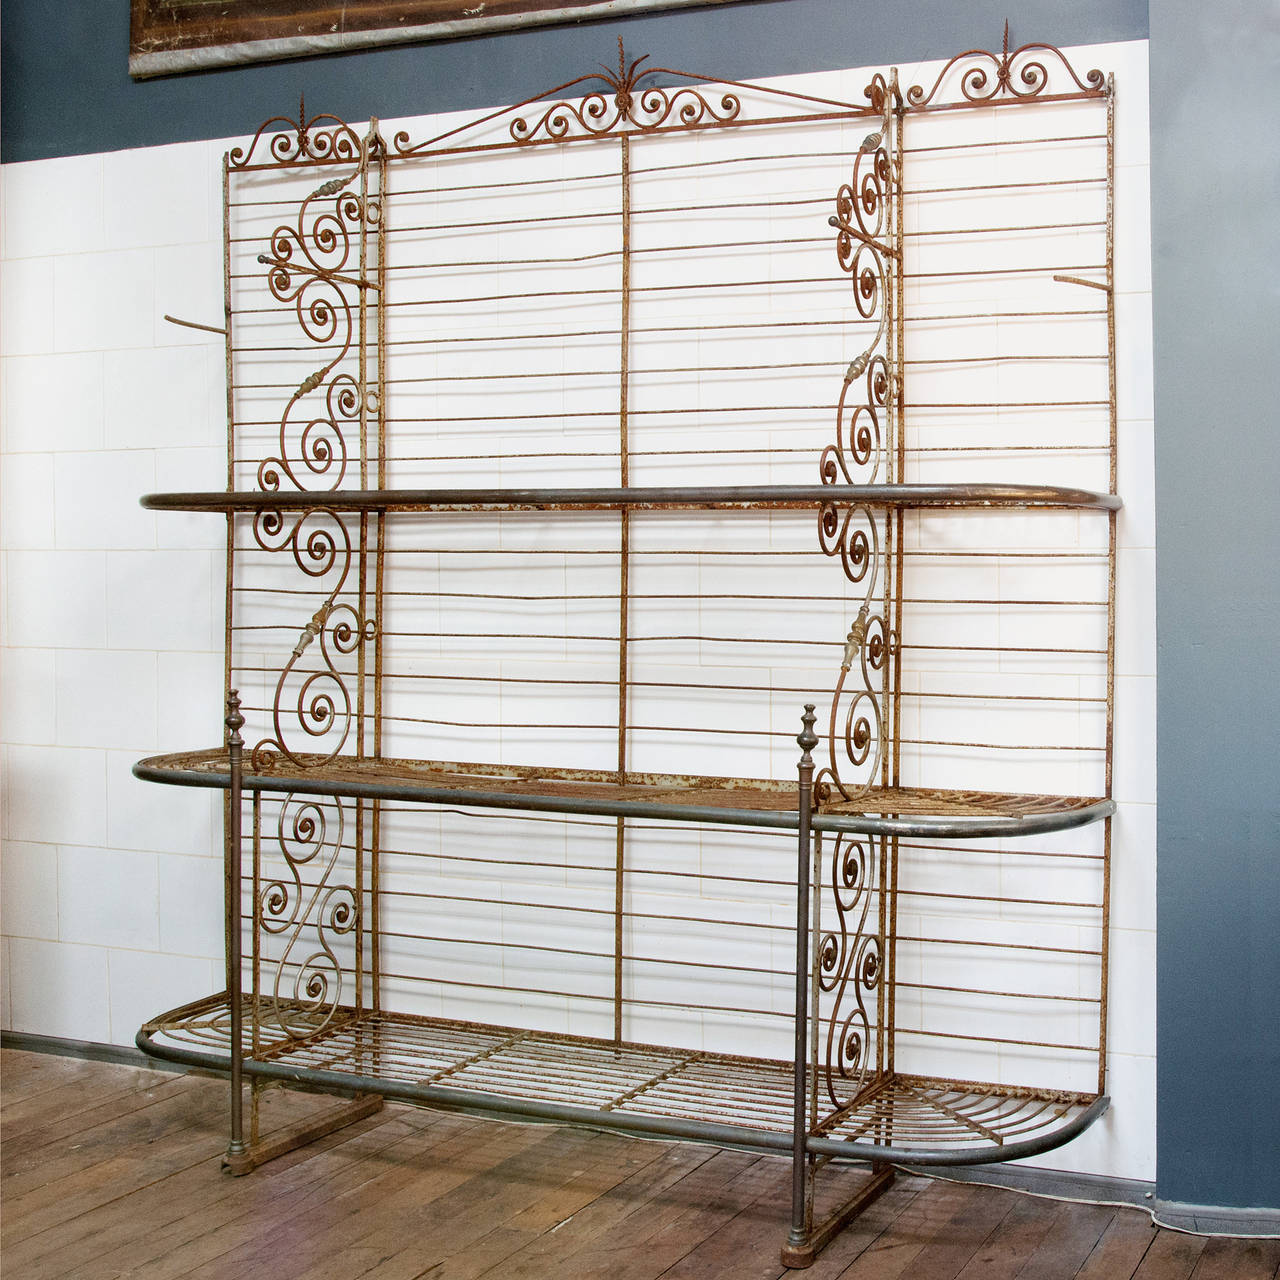 A French wrought iron Présentoir de Boulangerie, 19th century, the three tiers supported by s-scrolls, stamped to the base 'Plaire Beauvilain 99 Rue des Orteaux Paris'.

Available to view at Brunswick House, London.

243cm high, 221cm wide,